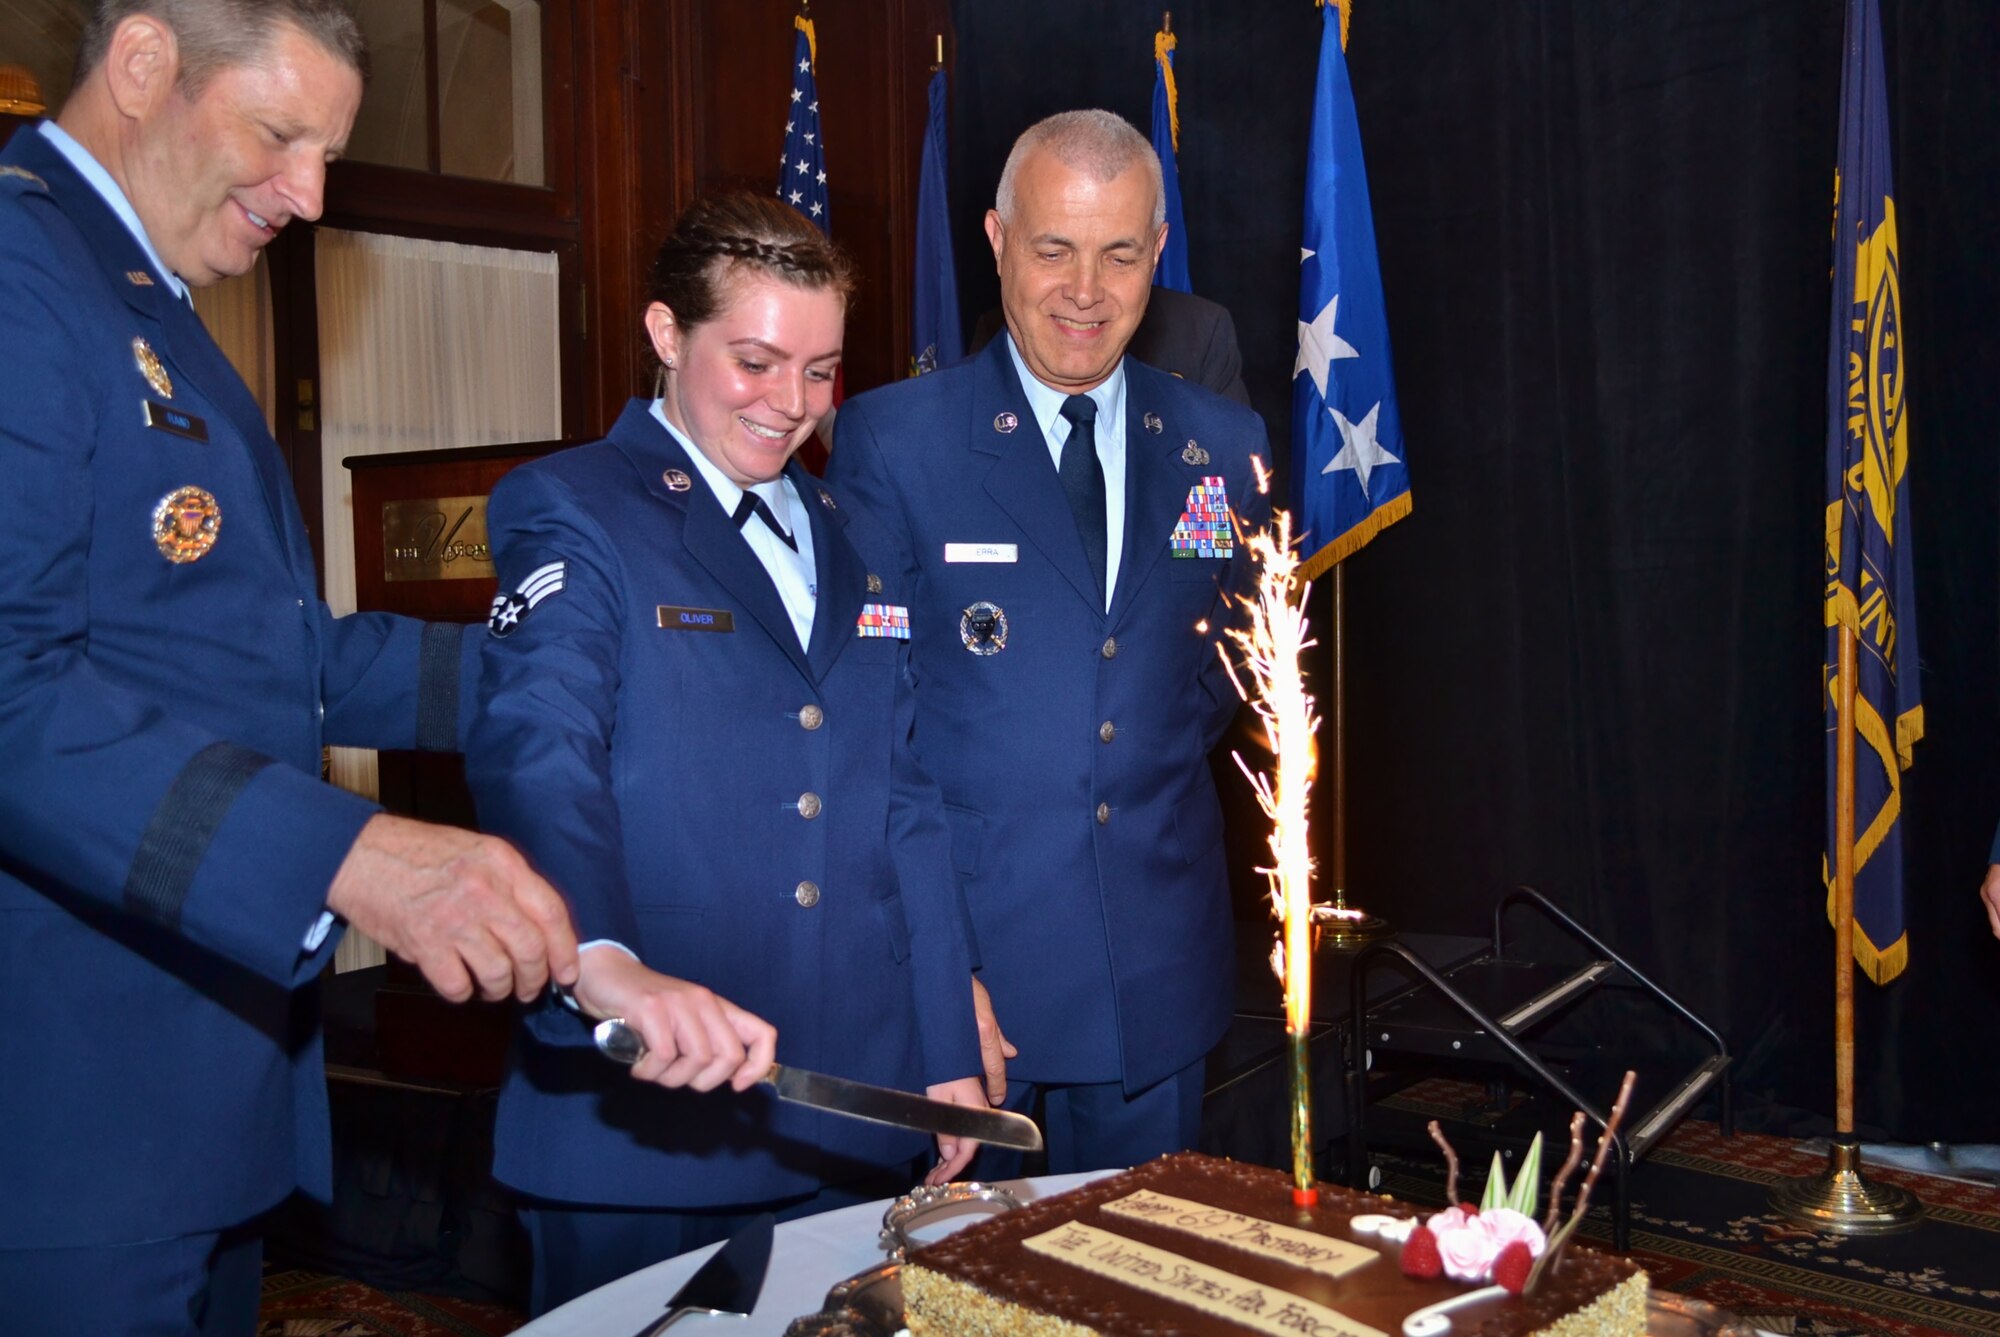 Gen. Robin Rand, Air Force Global Strike Command commander, Barksdale Air Force Base, Louisiana, assists as the youngest and oldest Airmen in attendance cut the cake during the Air Force birthday celebration hosted by and held at the Union League of Philadelphia, Sept. 16, 2016. This year the Air Force boasts 69 years as a military component. (U.S. Air Force photo by Tech. Sgt. Andria Allmond)